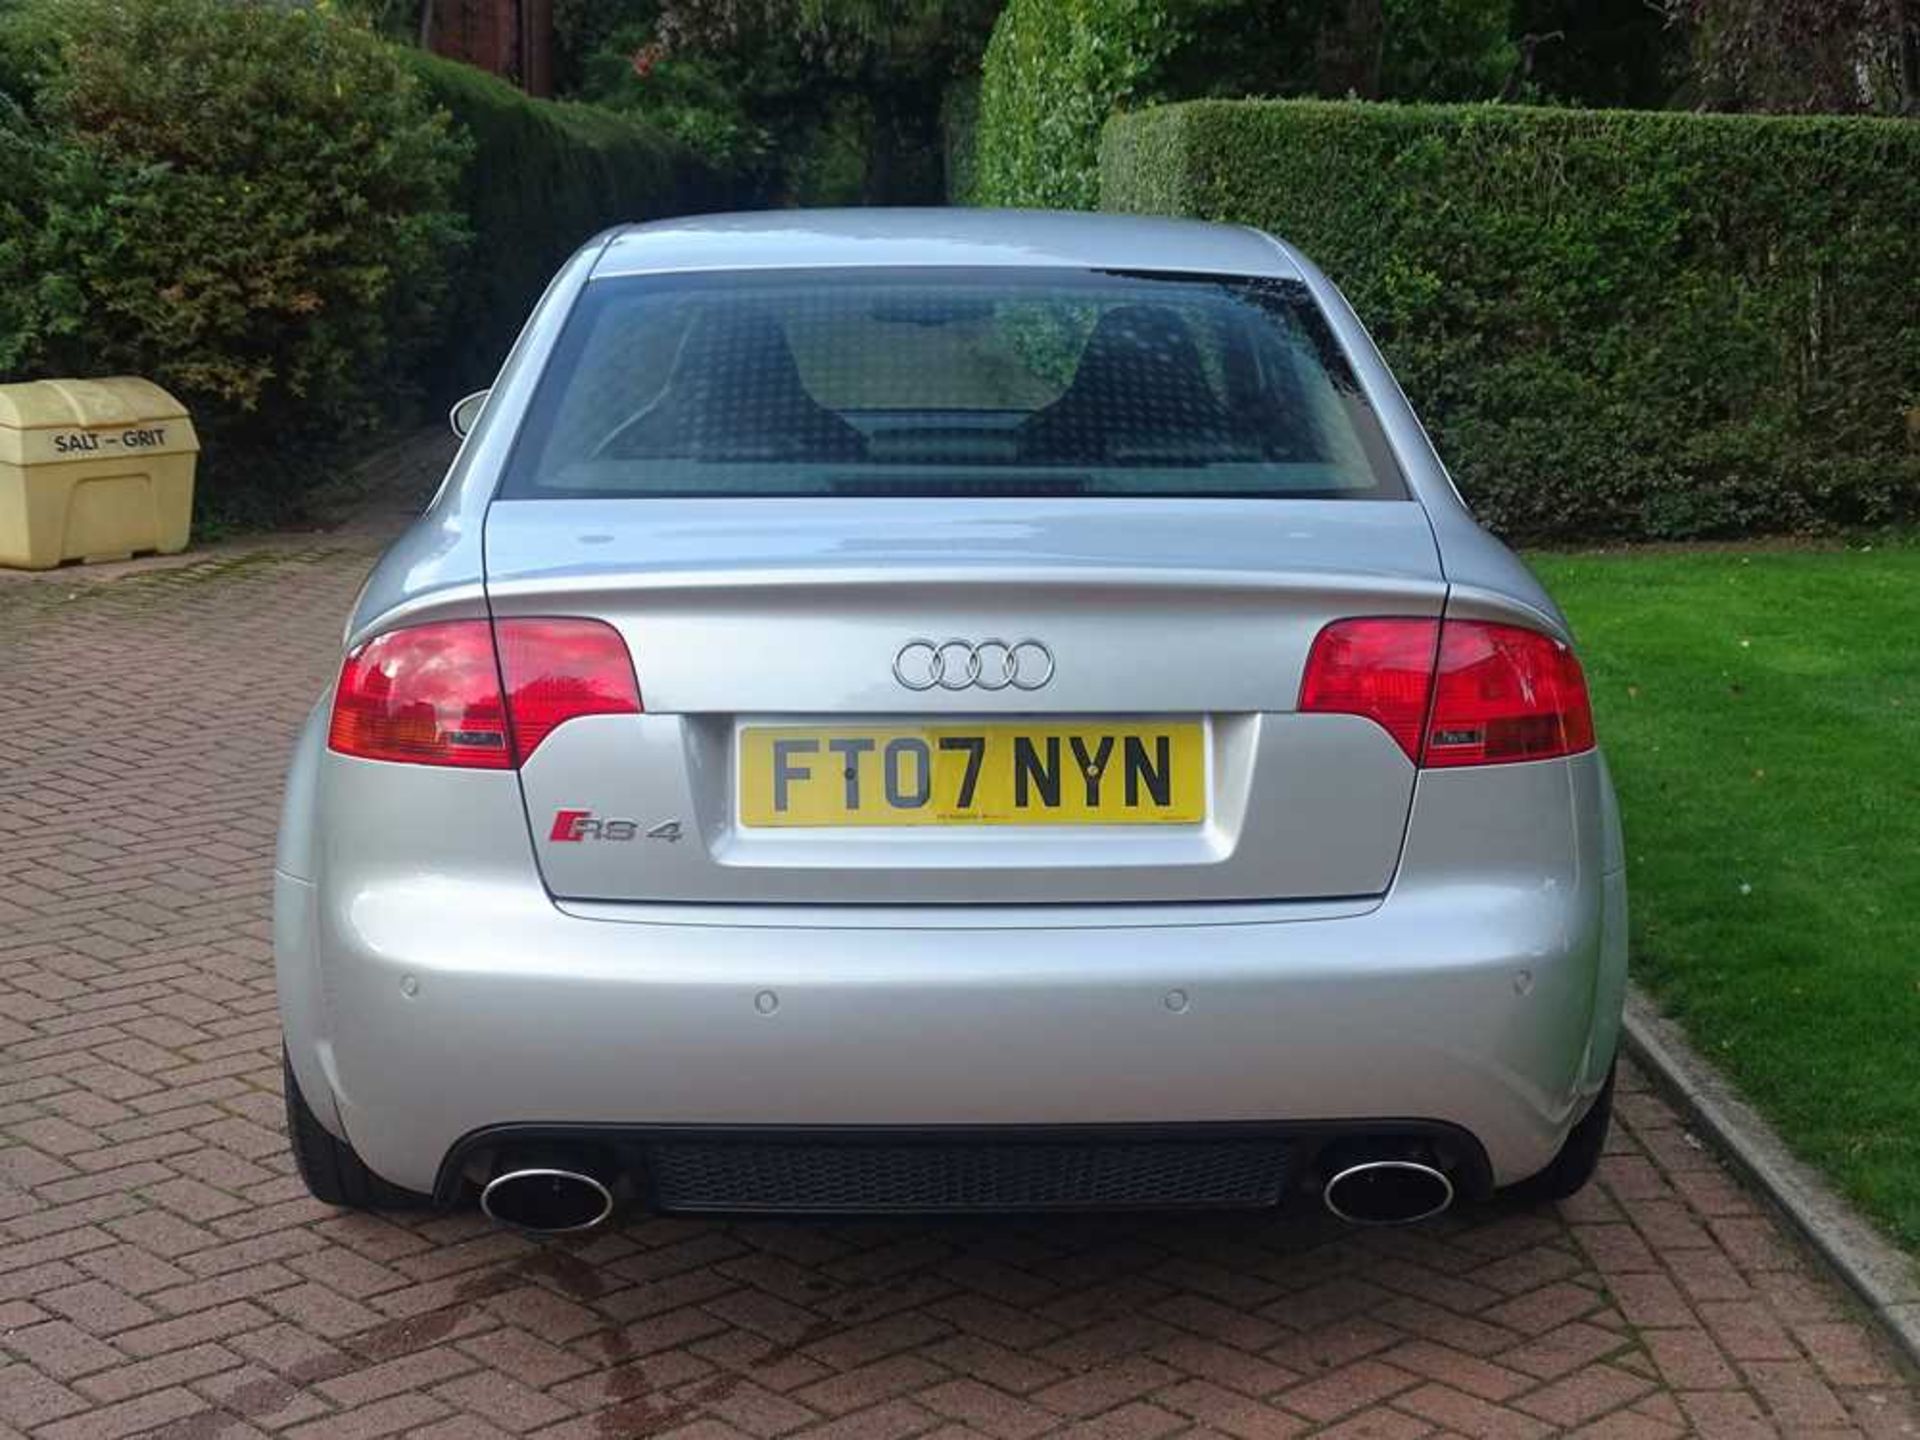 2007 Audi RS4 Saloon One owner and just c.60,000 miles from new - Image 77 of 86